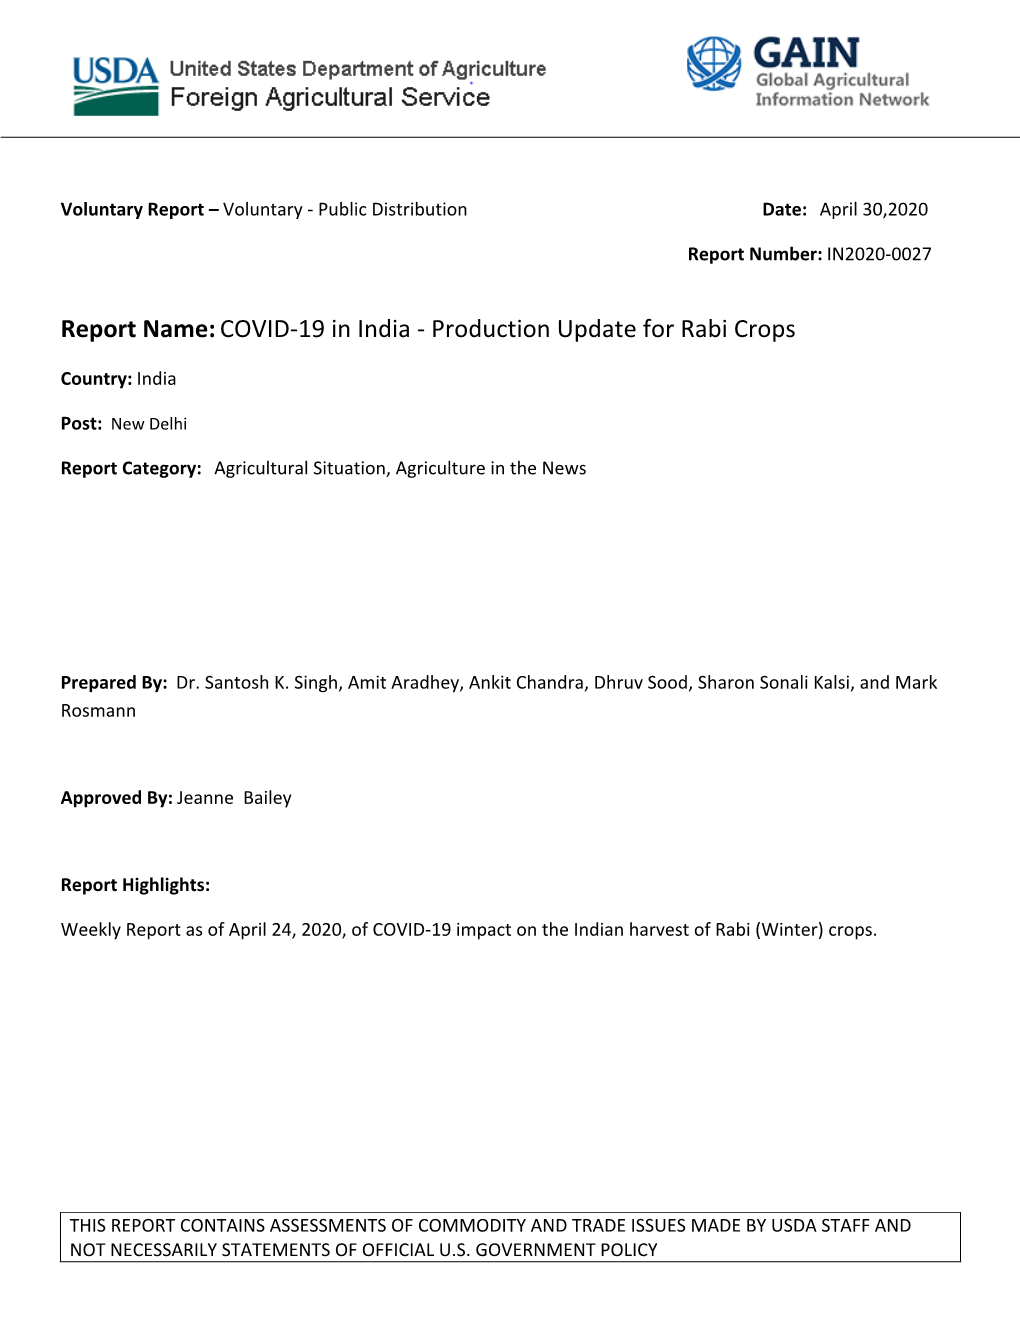 Report Name:COVID-19 in India